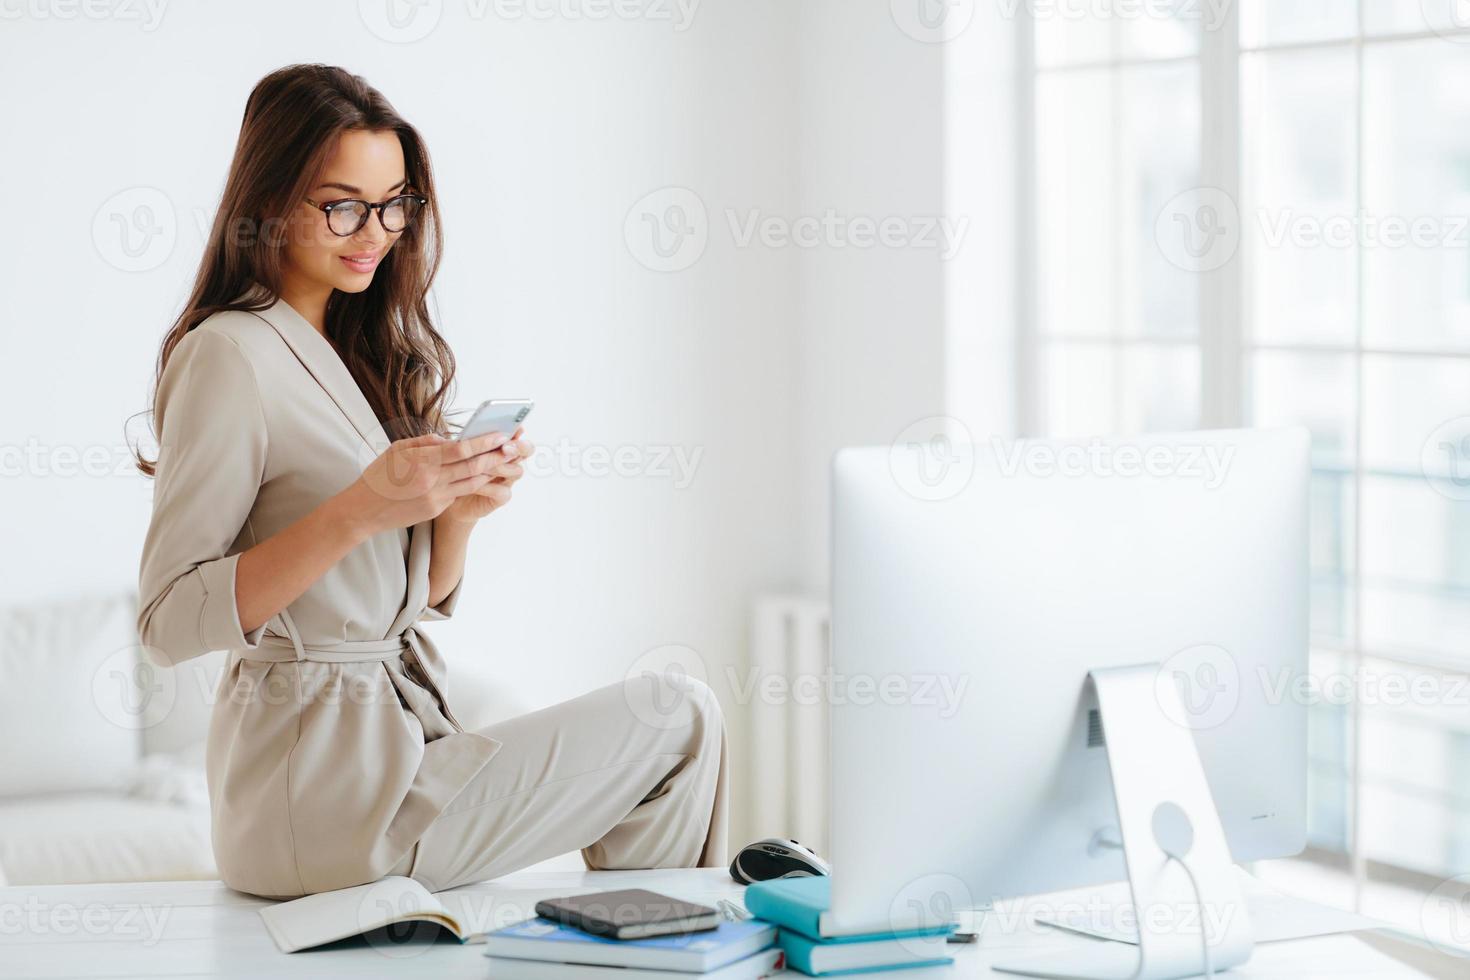 Elegant woman in beige formal suit reads news on website attentively, sits at desktop alone in cabinet, computer monitor and notepads around. Female employee uses modern smartphone in office photo